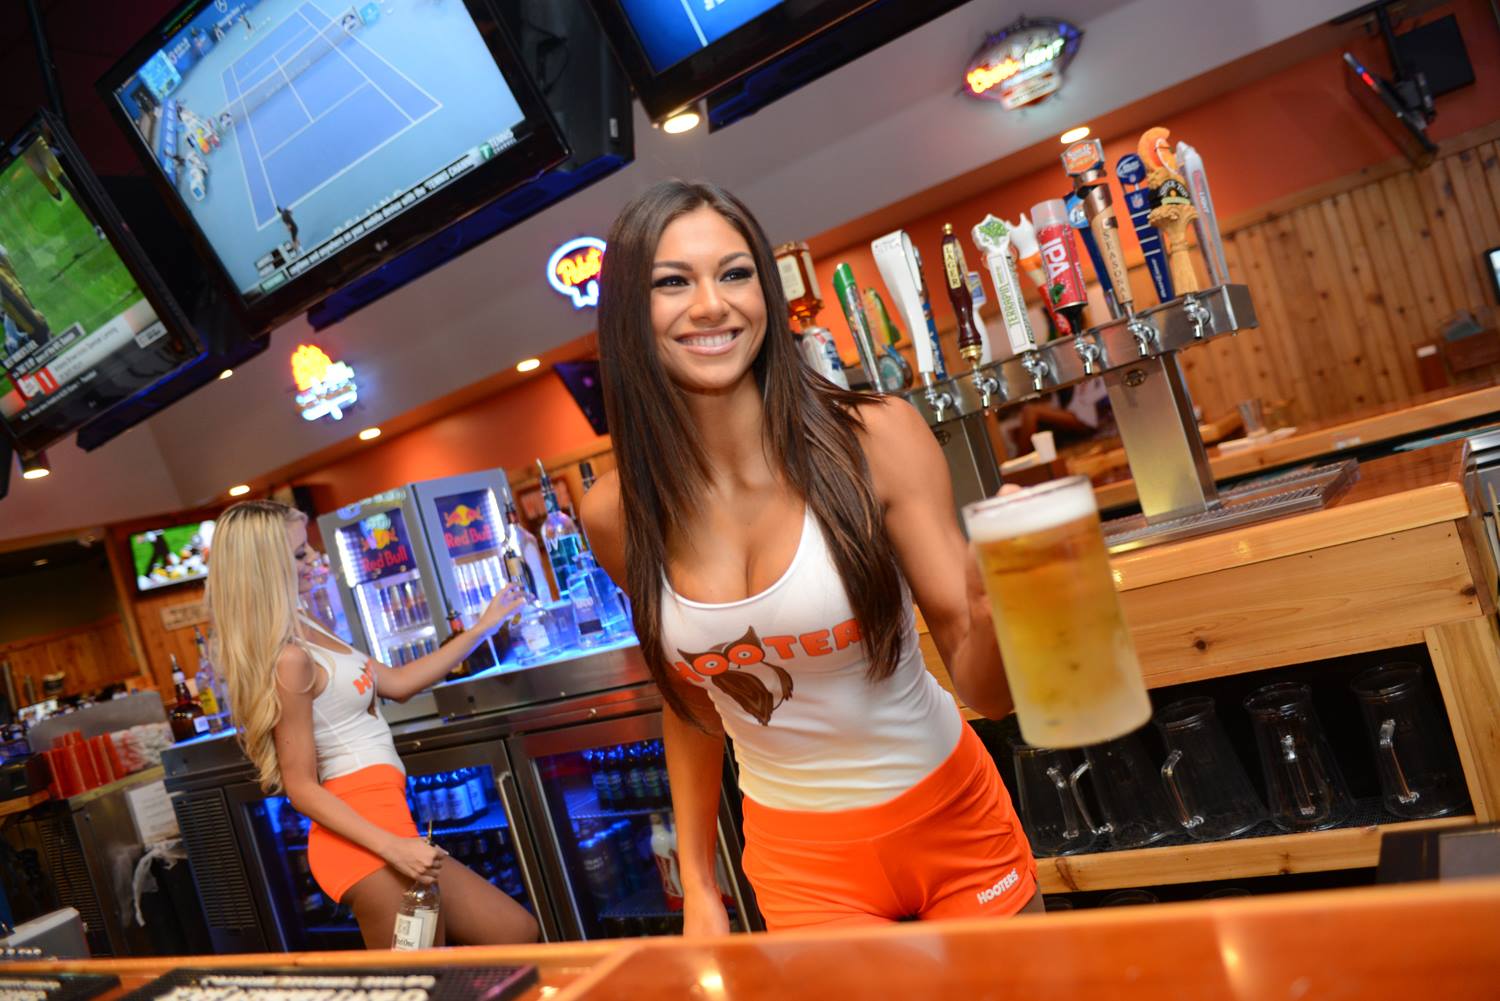 Best Hooters photos from their FB timeline (50 pics)